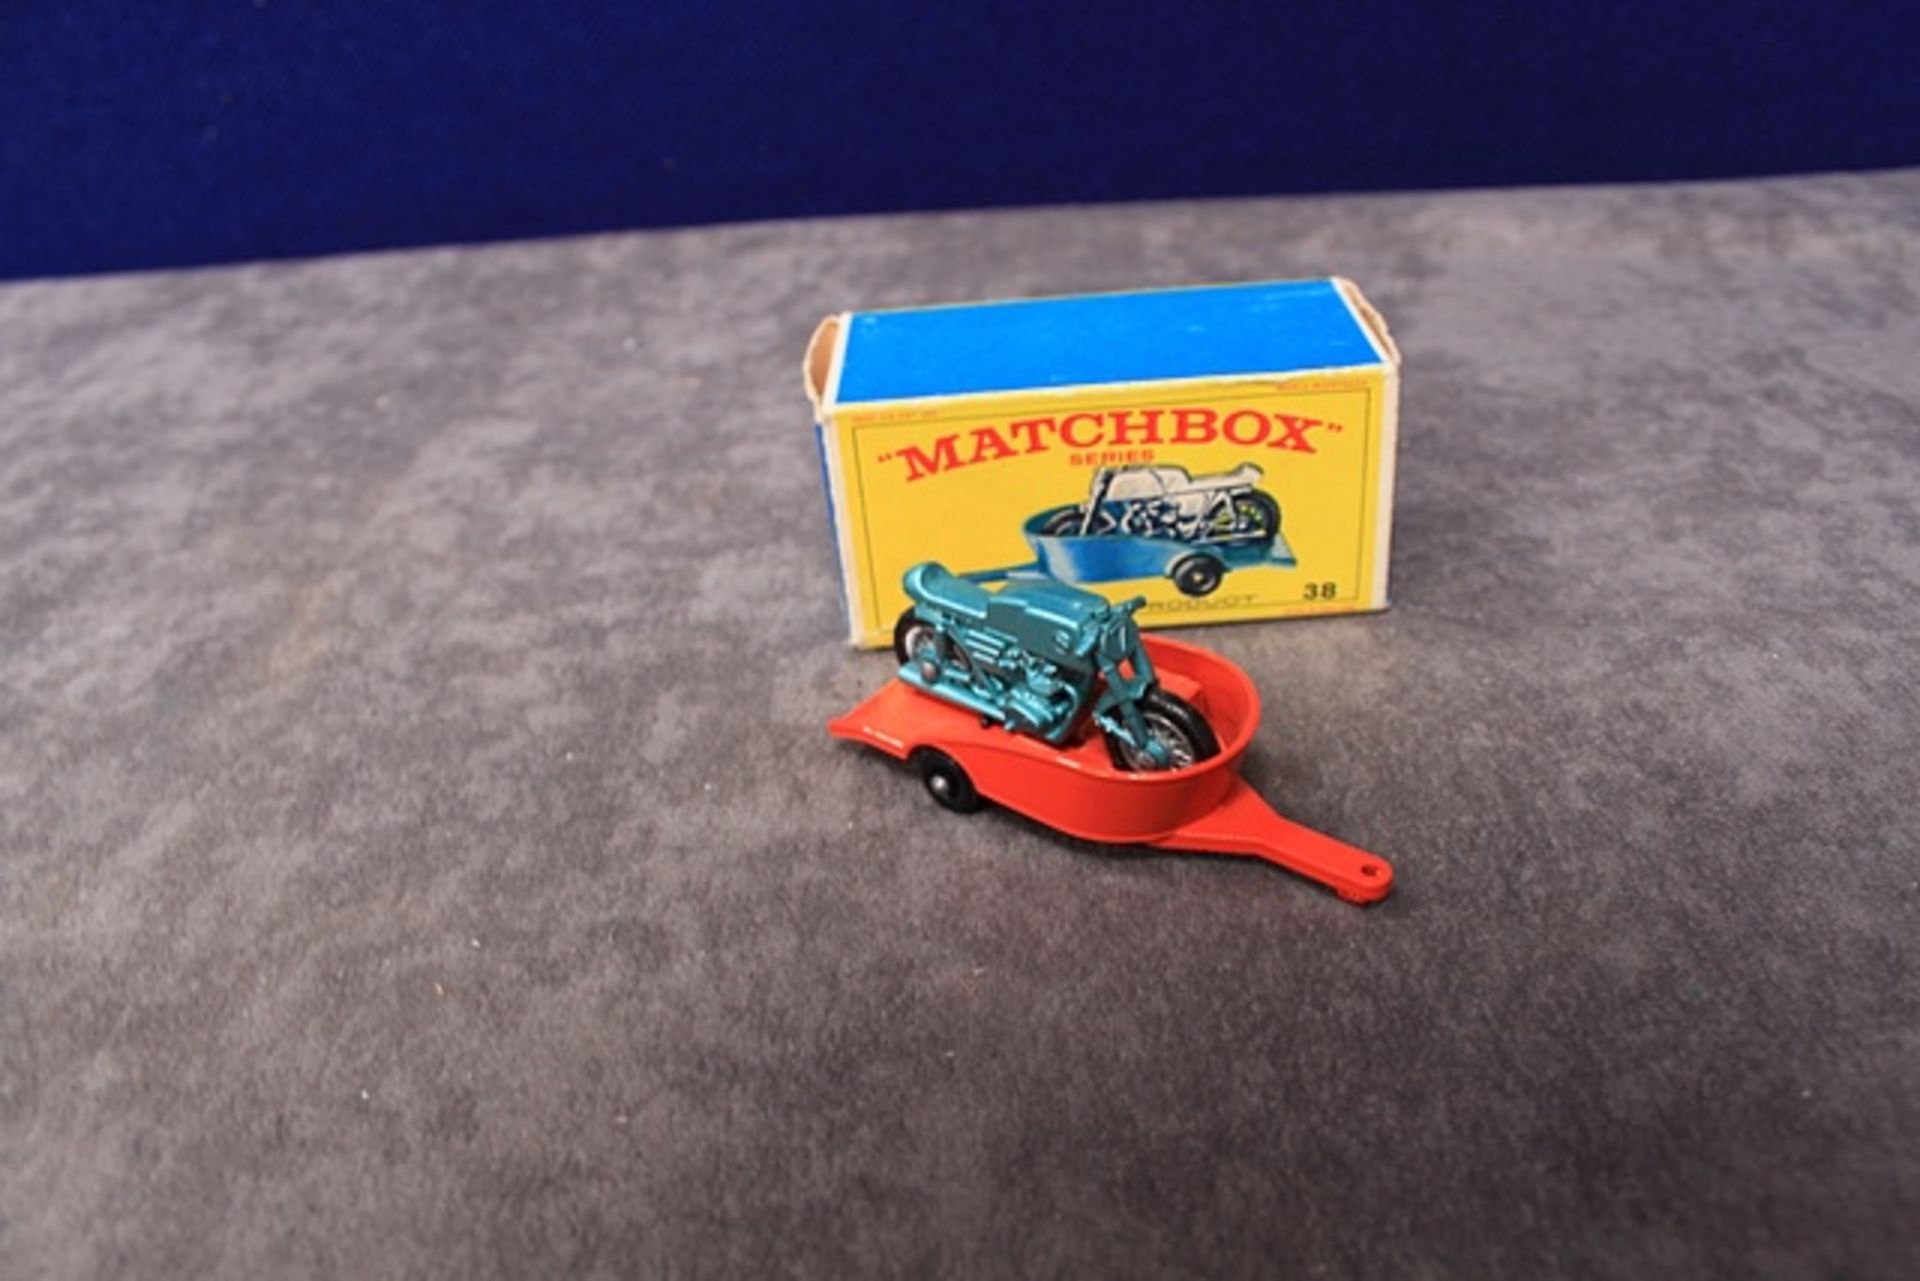 Mint Matchbox A Lesney Product #38 Honda Motor Cycles & Trailer no decals, orange trailer in a nr